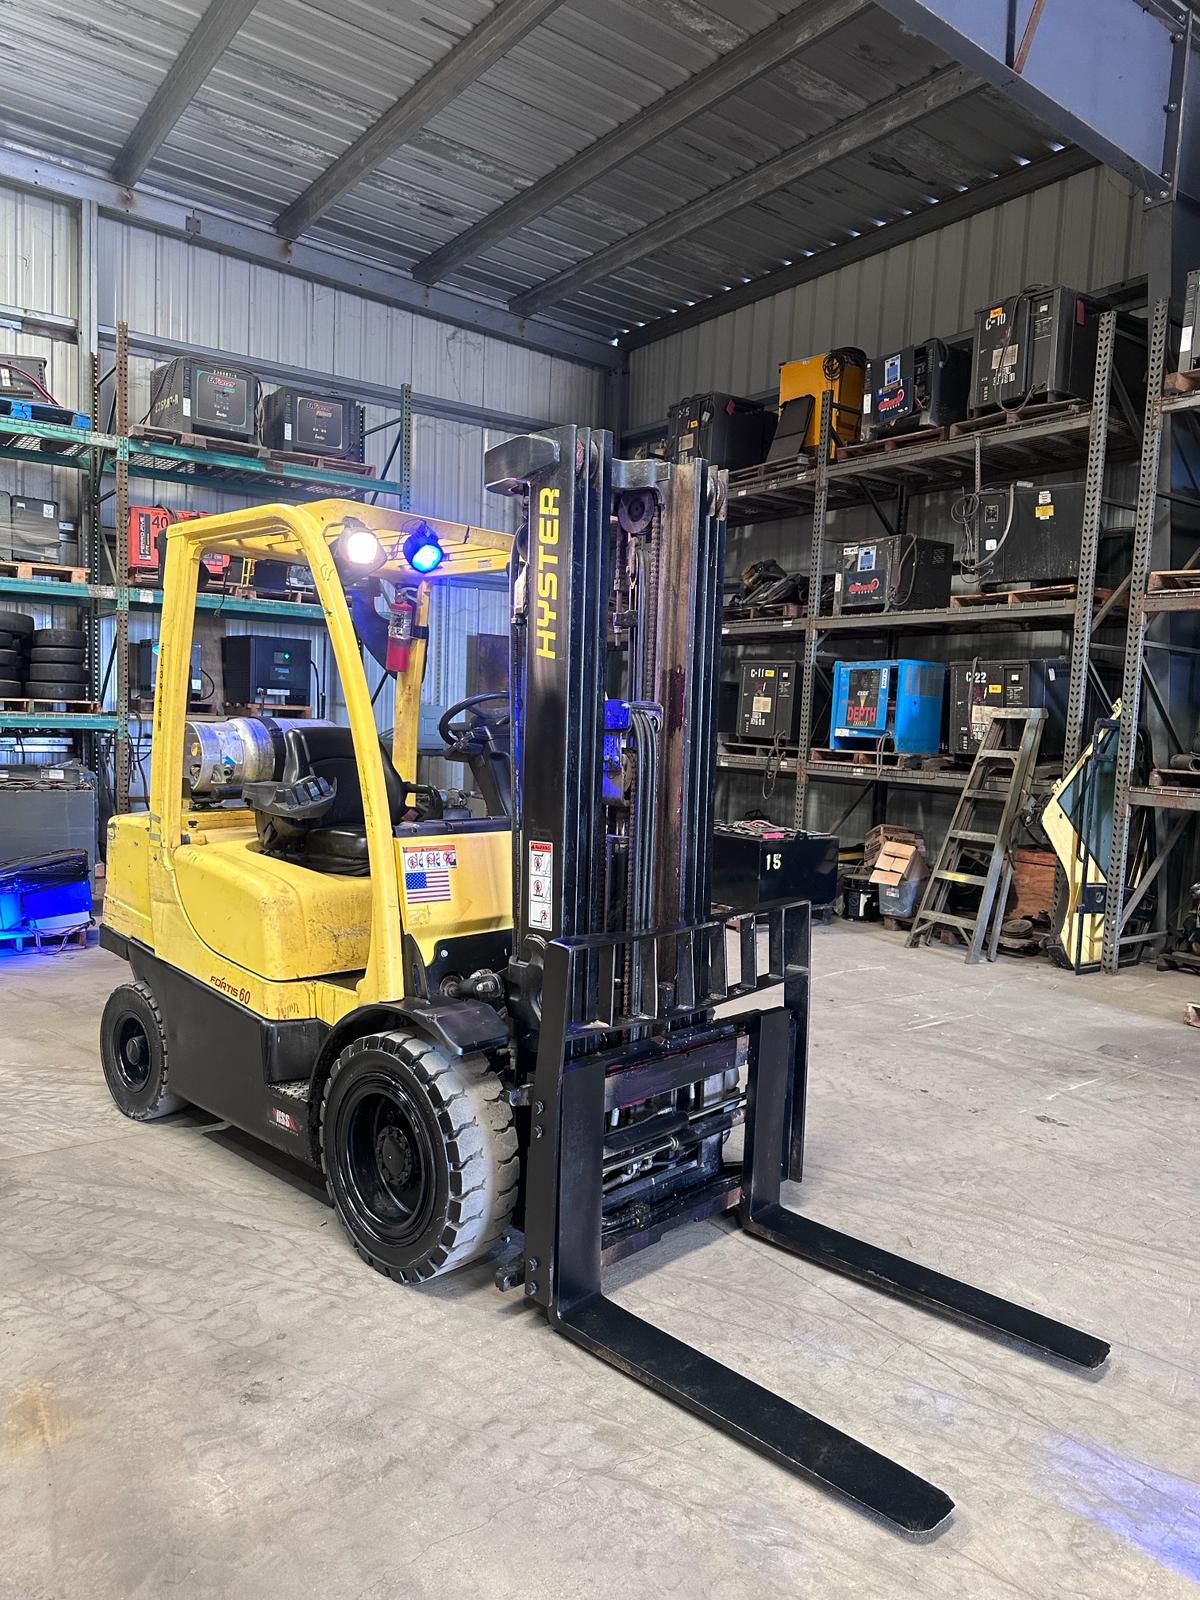 2015 Hyster 6000 lbs capacity forklift